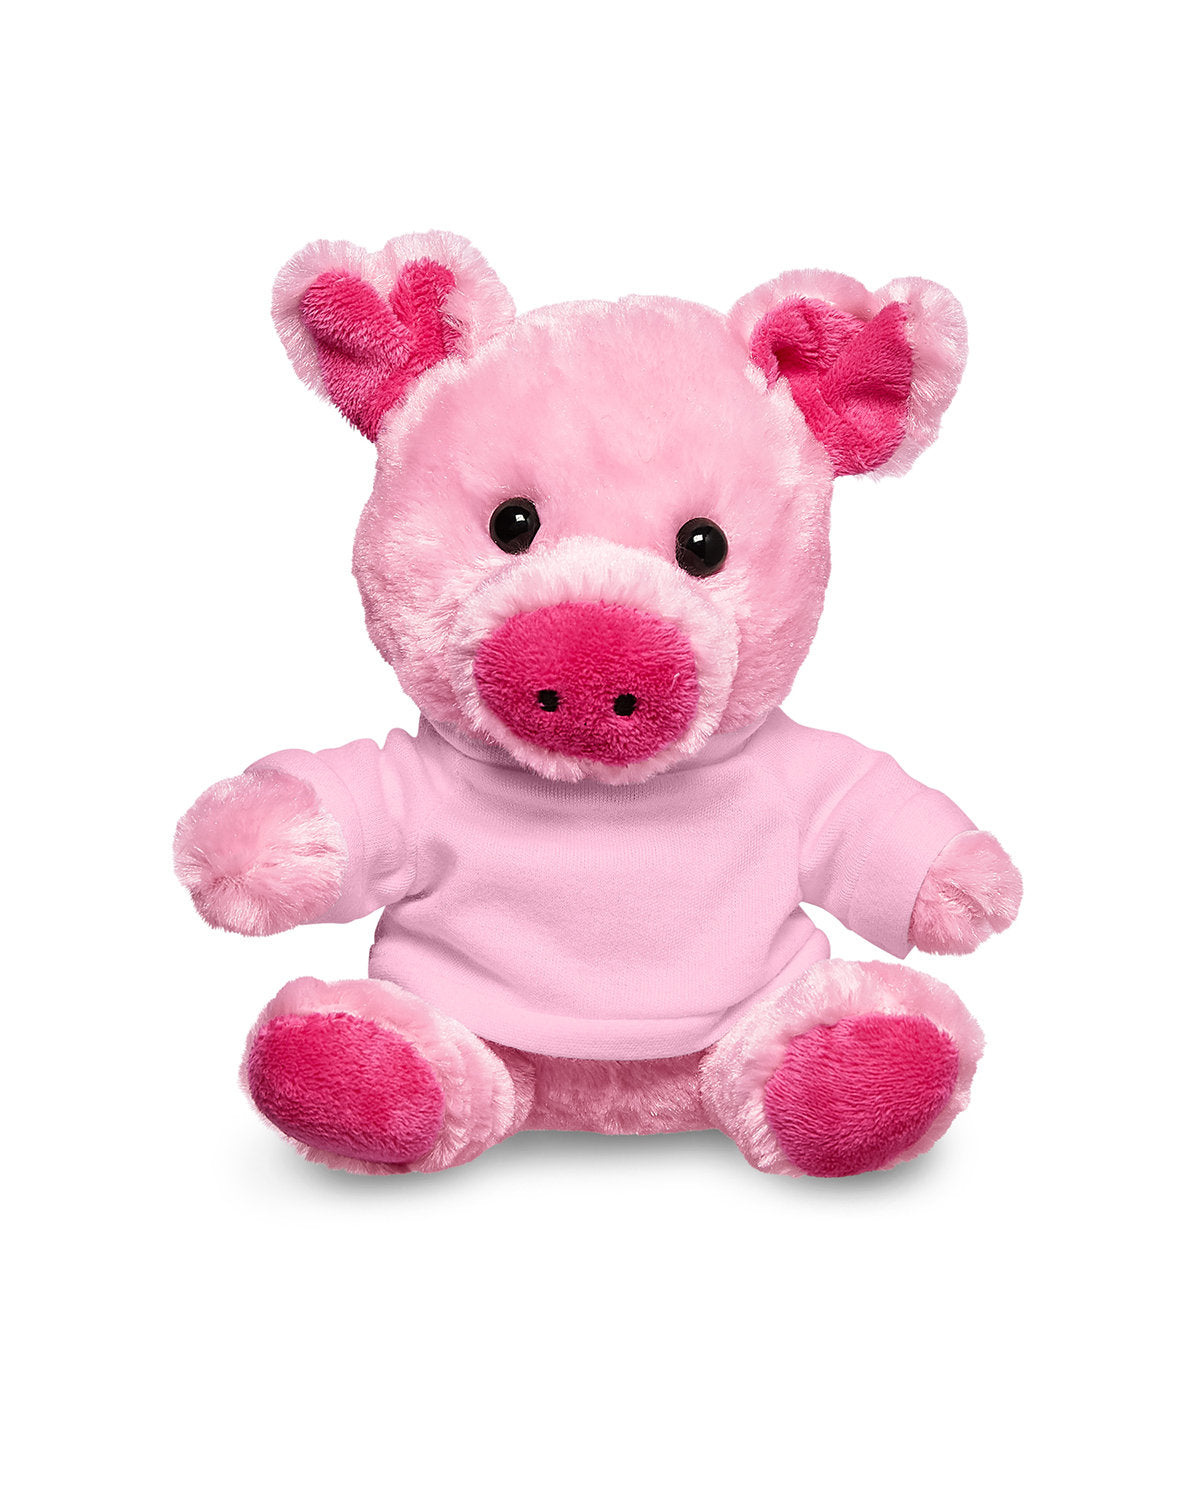 7" Plush Pig With T-Shirt